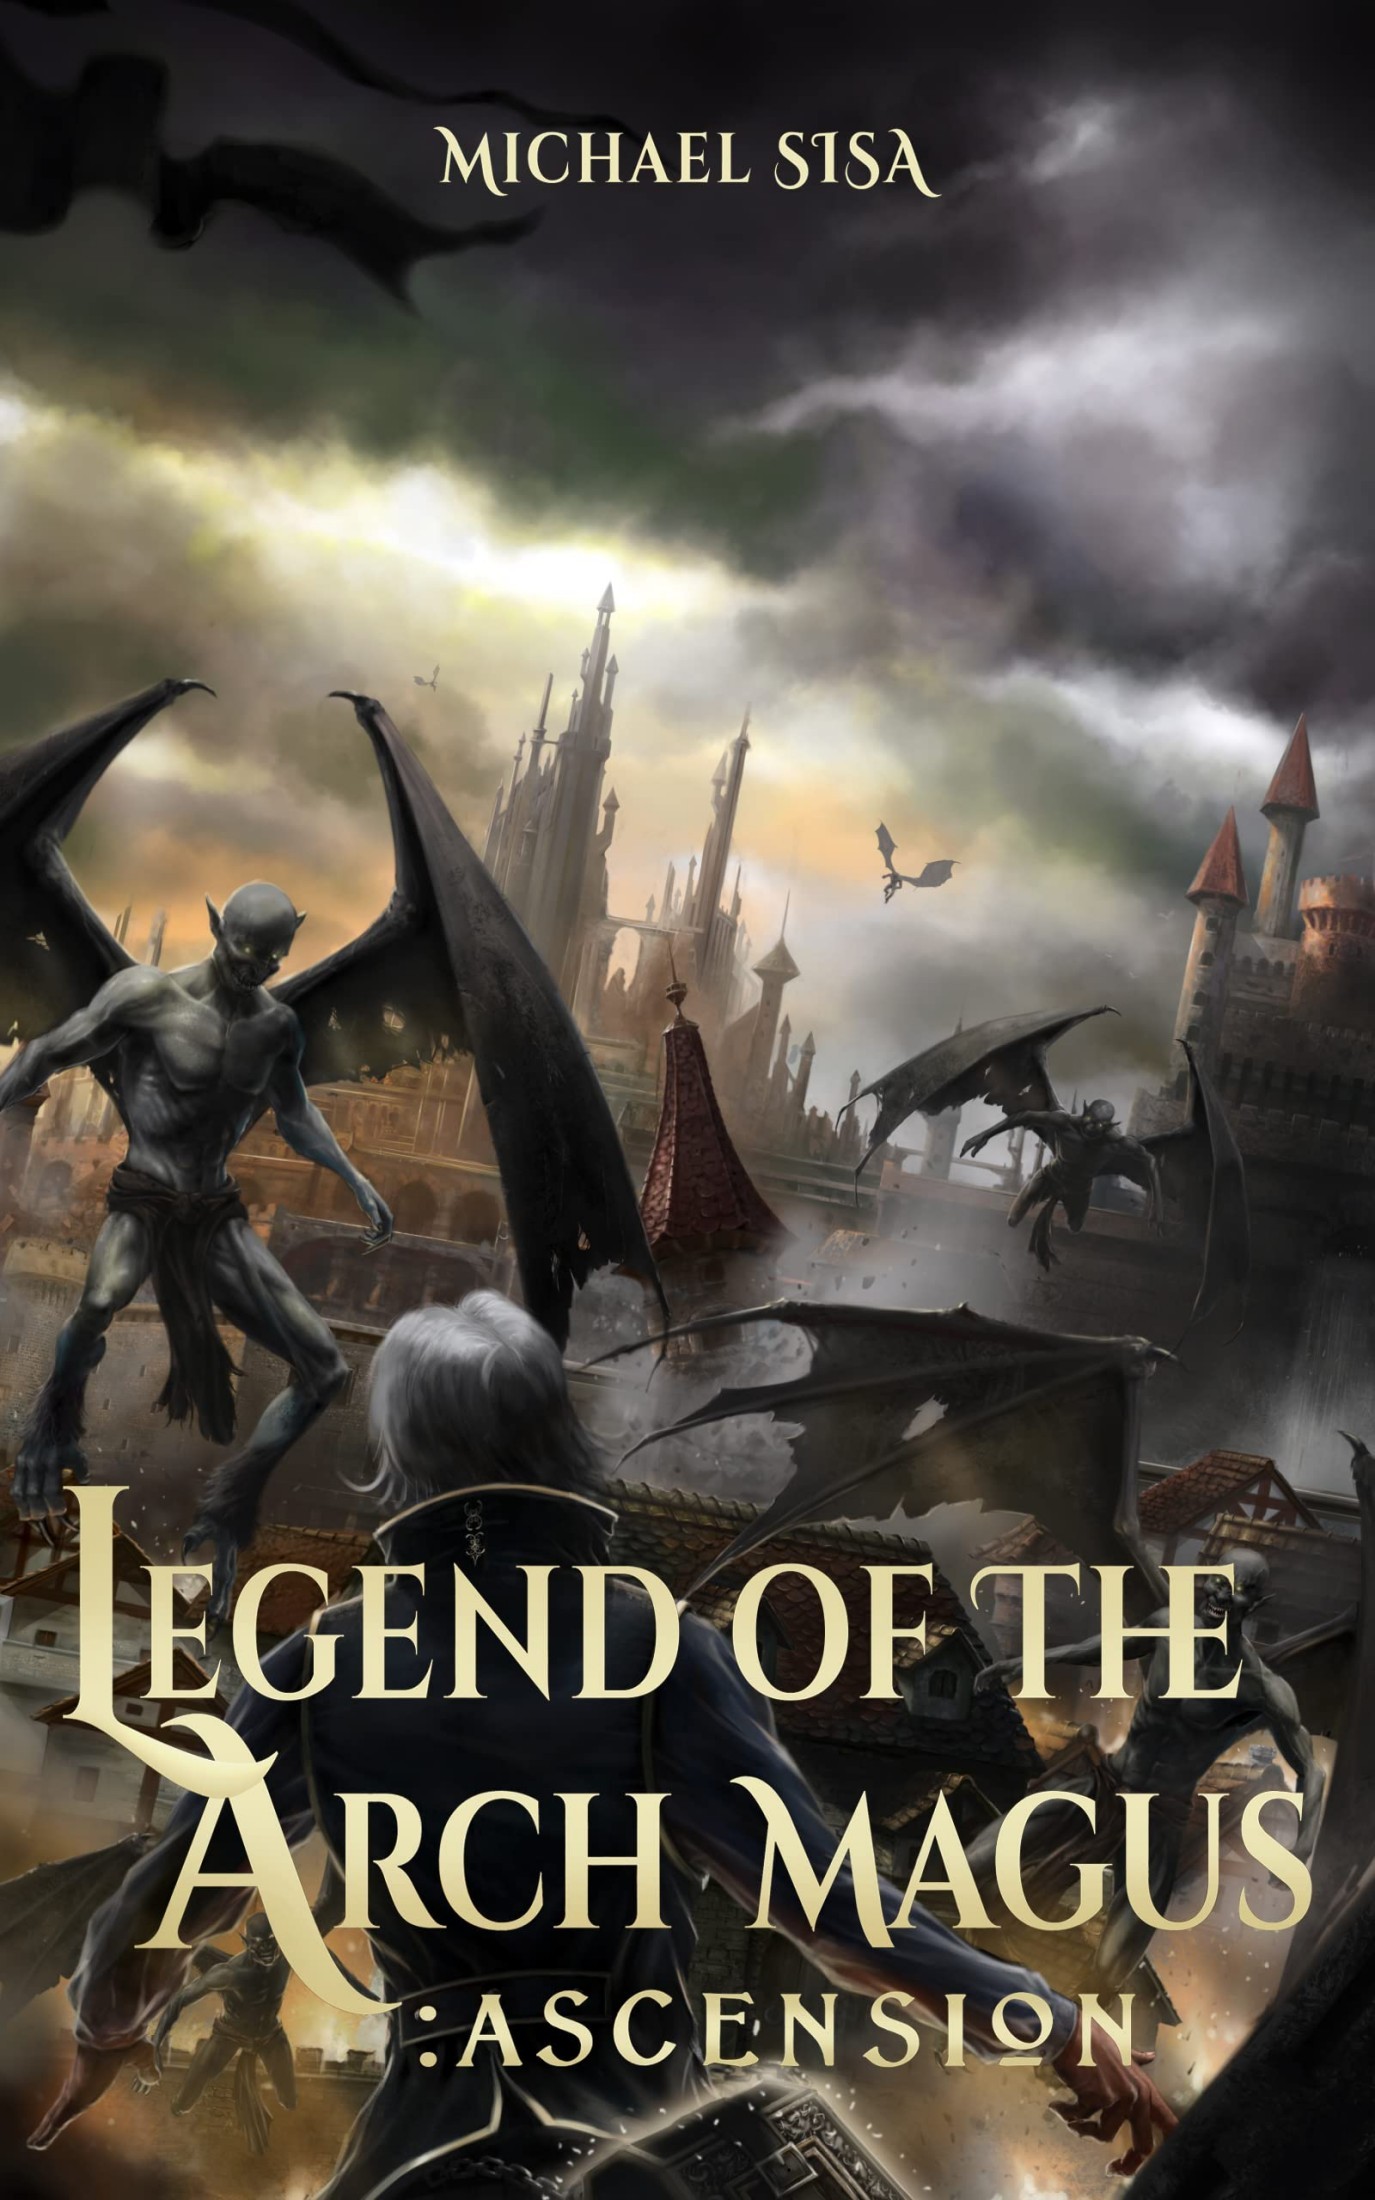 Legend of the Arch Magus: Ascension